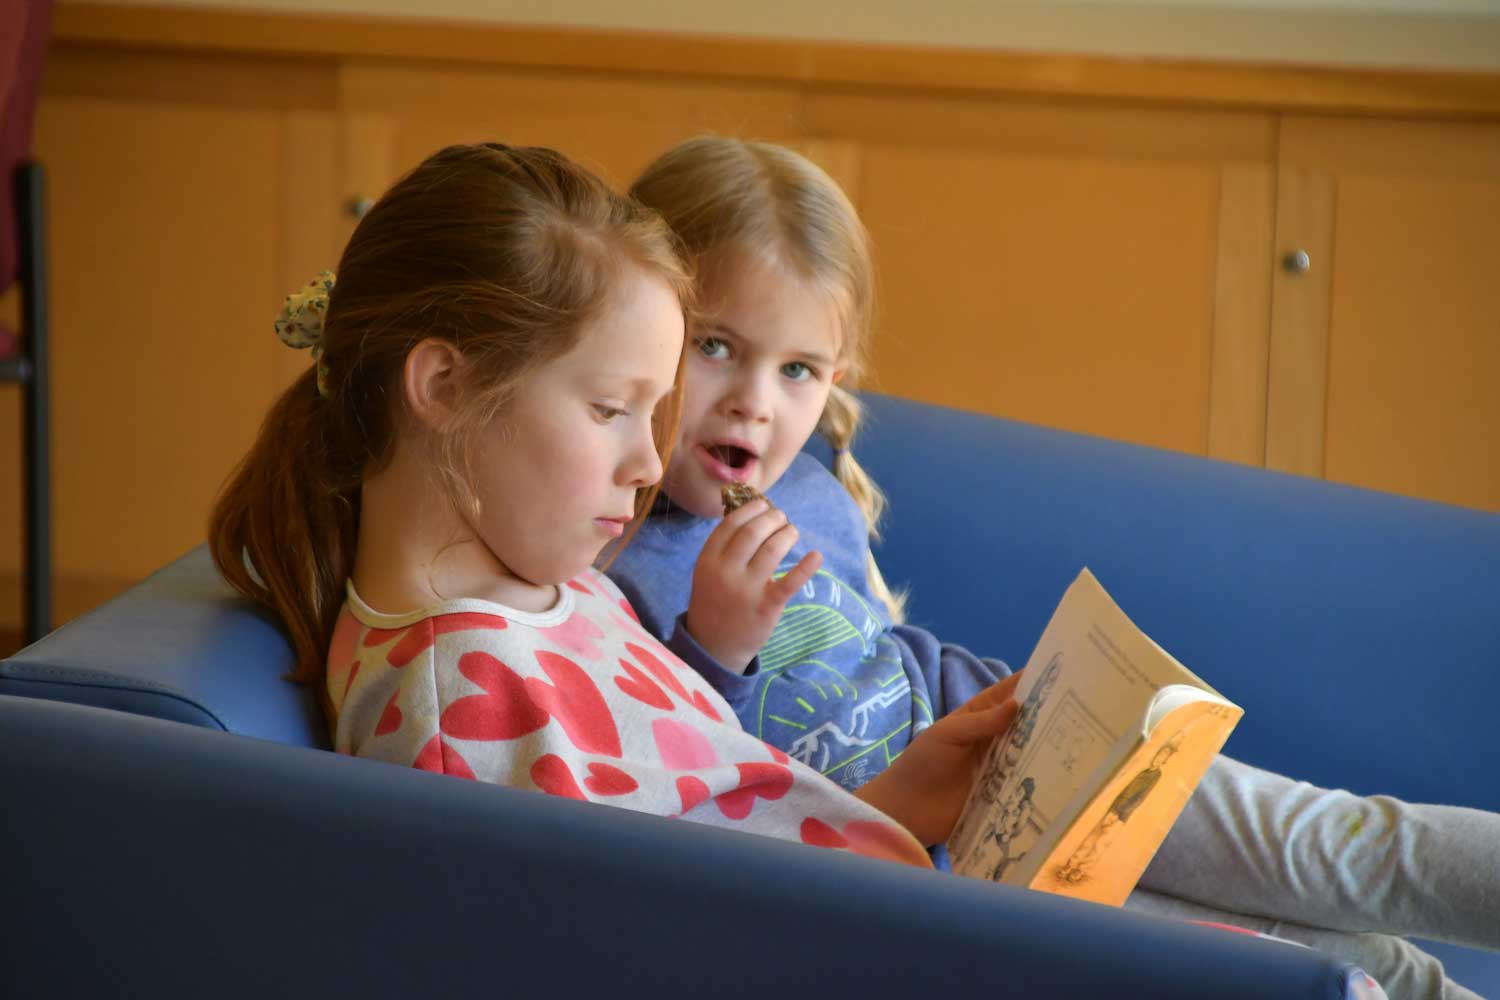 Two children sitting in a couch looking at a book.